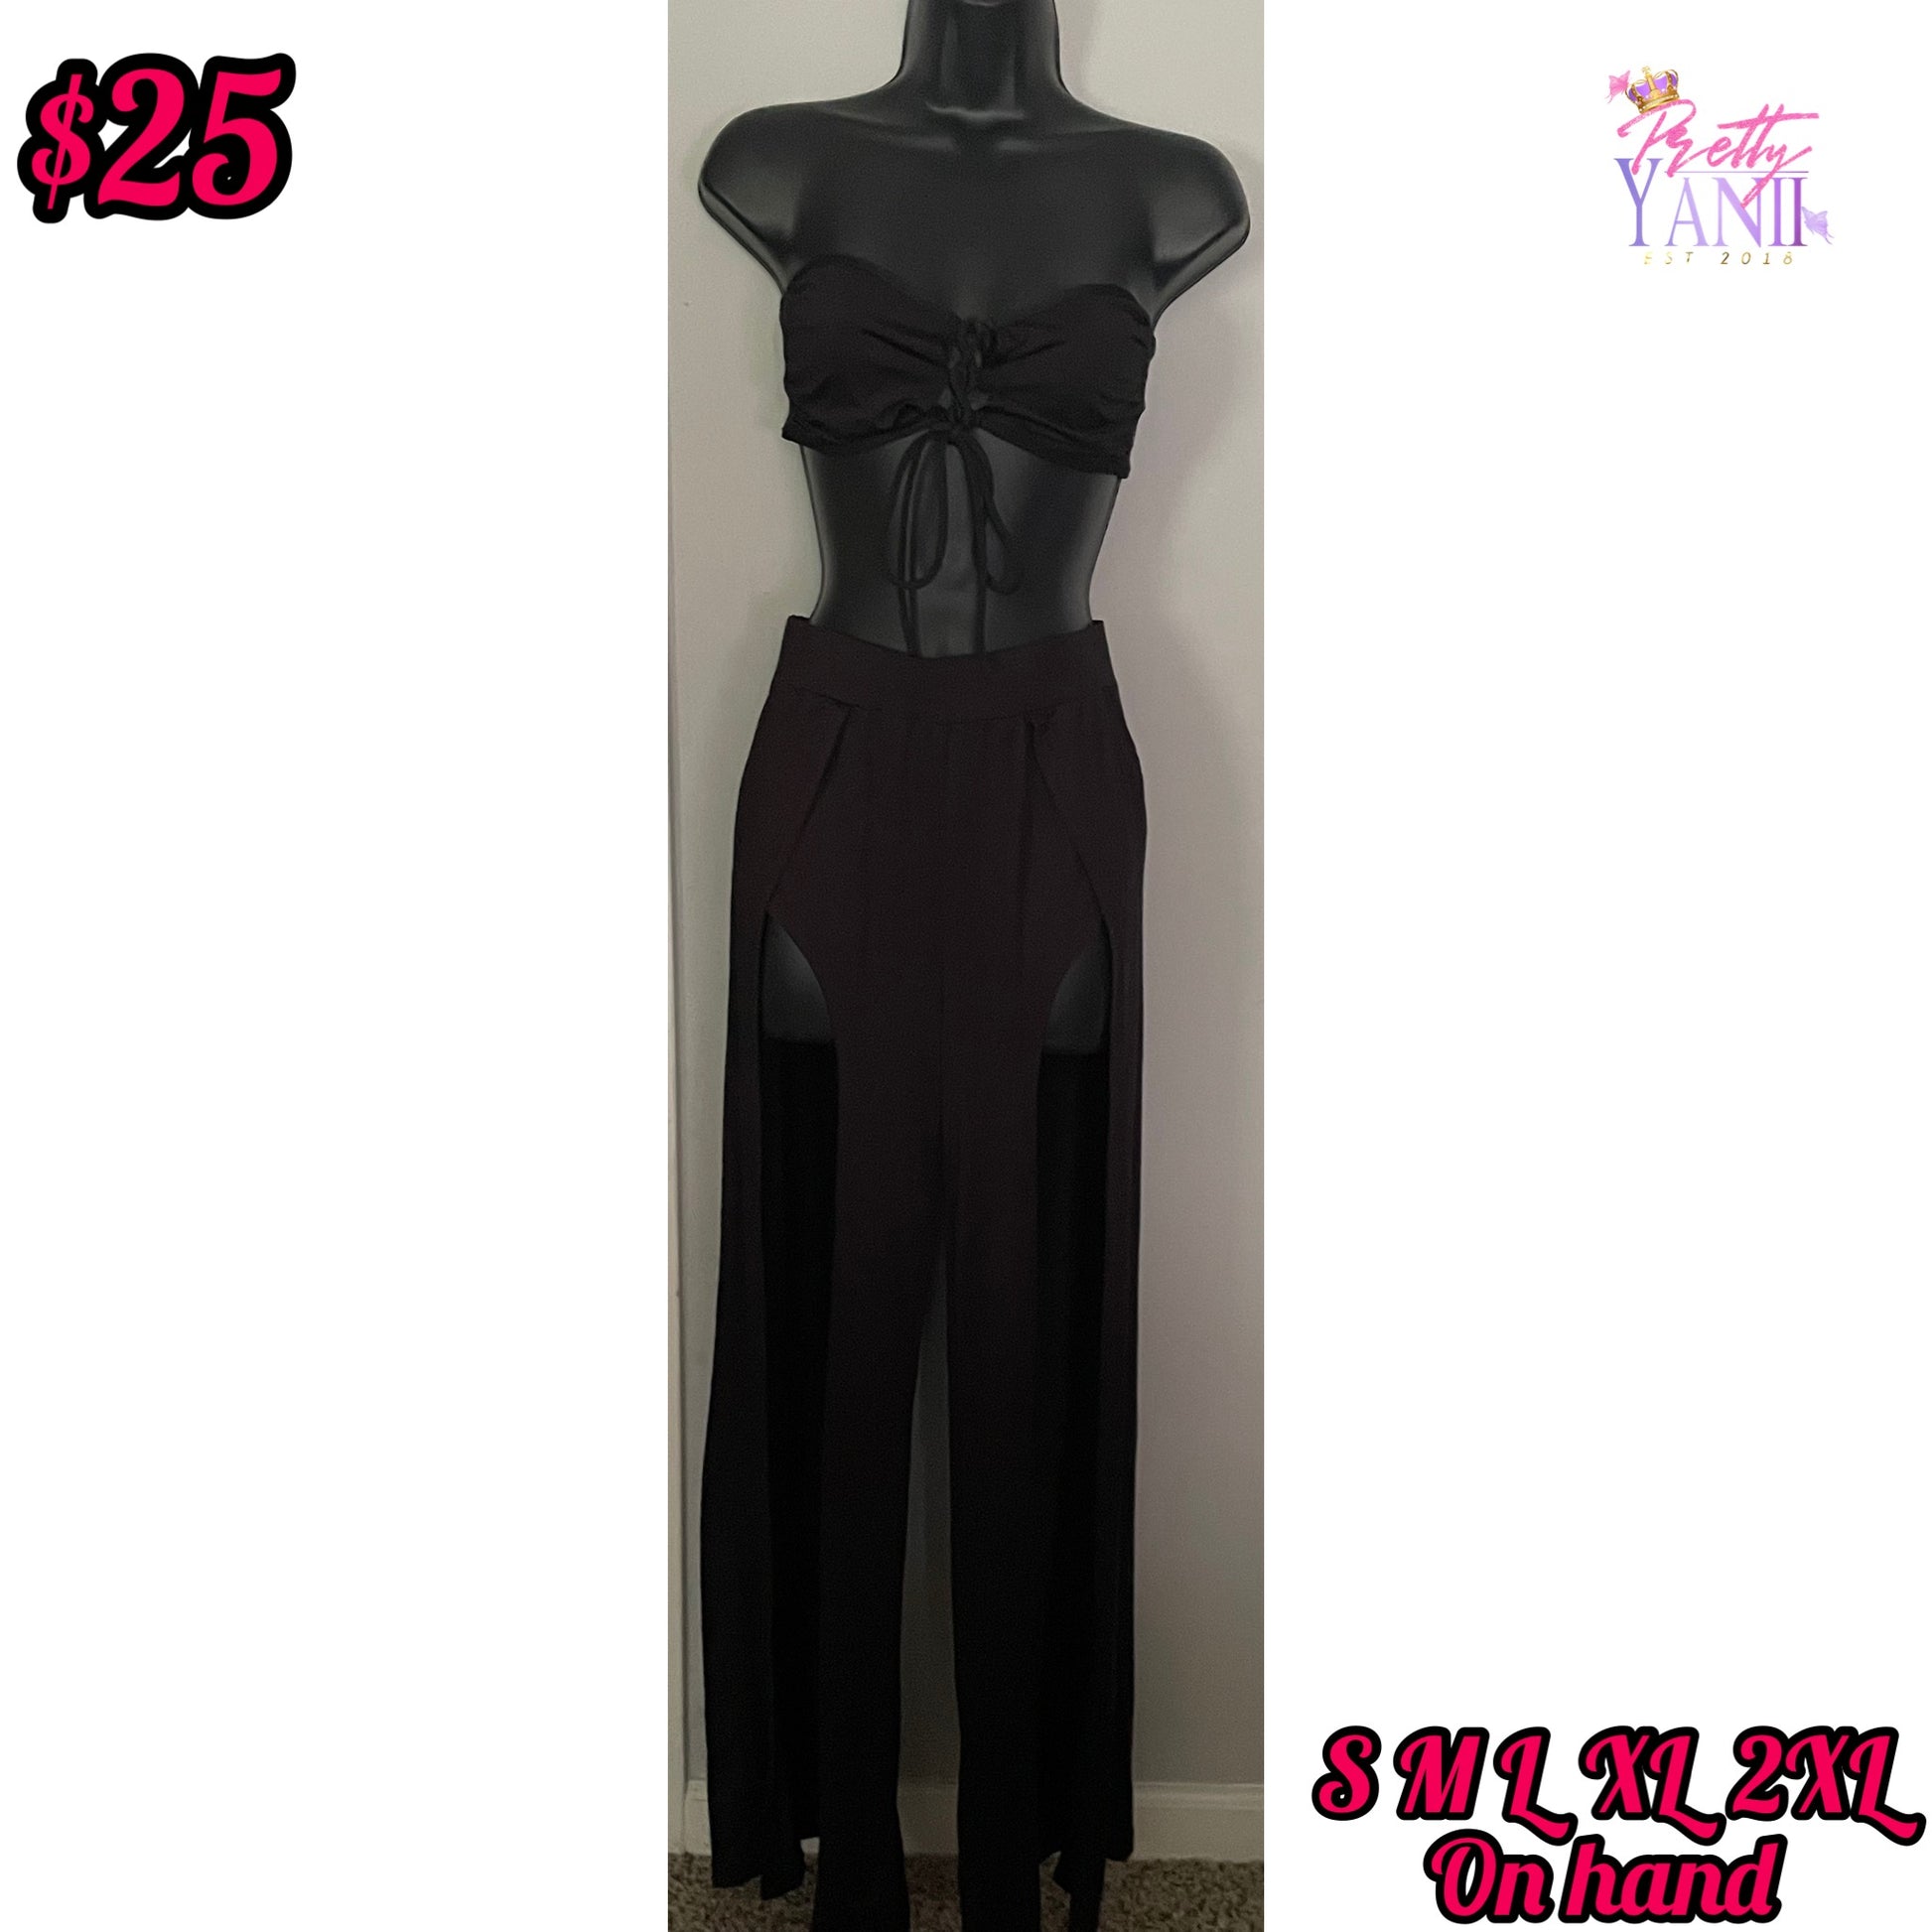 matching set includes a black tube top and high waist split thigh pants